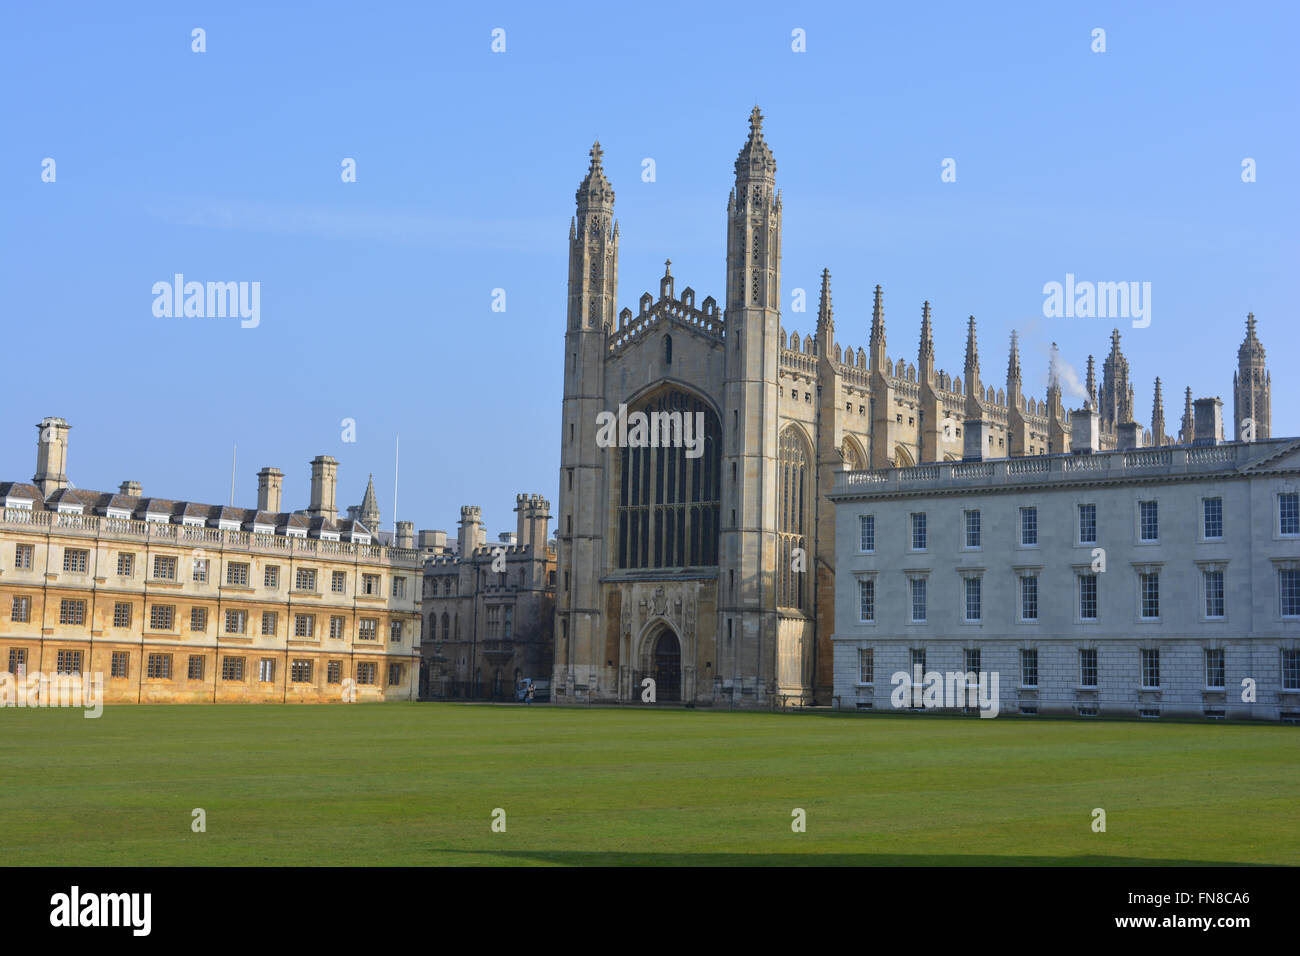 Clare College, King's College Chapel, Gibb's Building and The Back Lawn, King's College, University of Cambridge, England Stock Photo